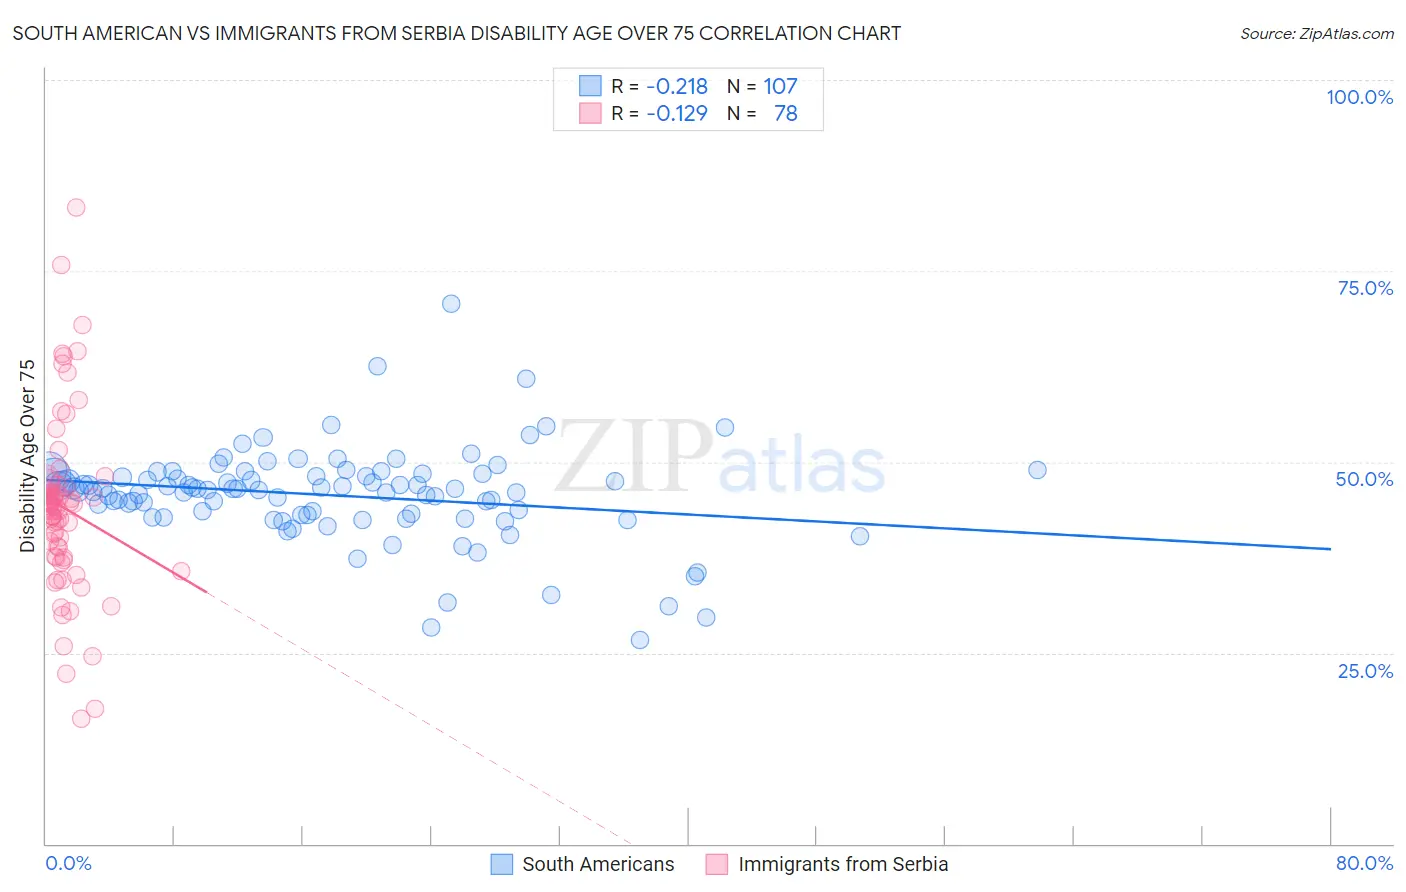 South American vs Immigrants from Serbia Disability Age Over 75